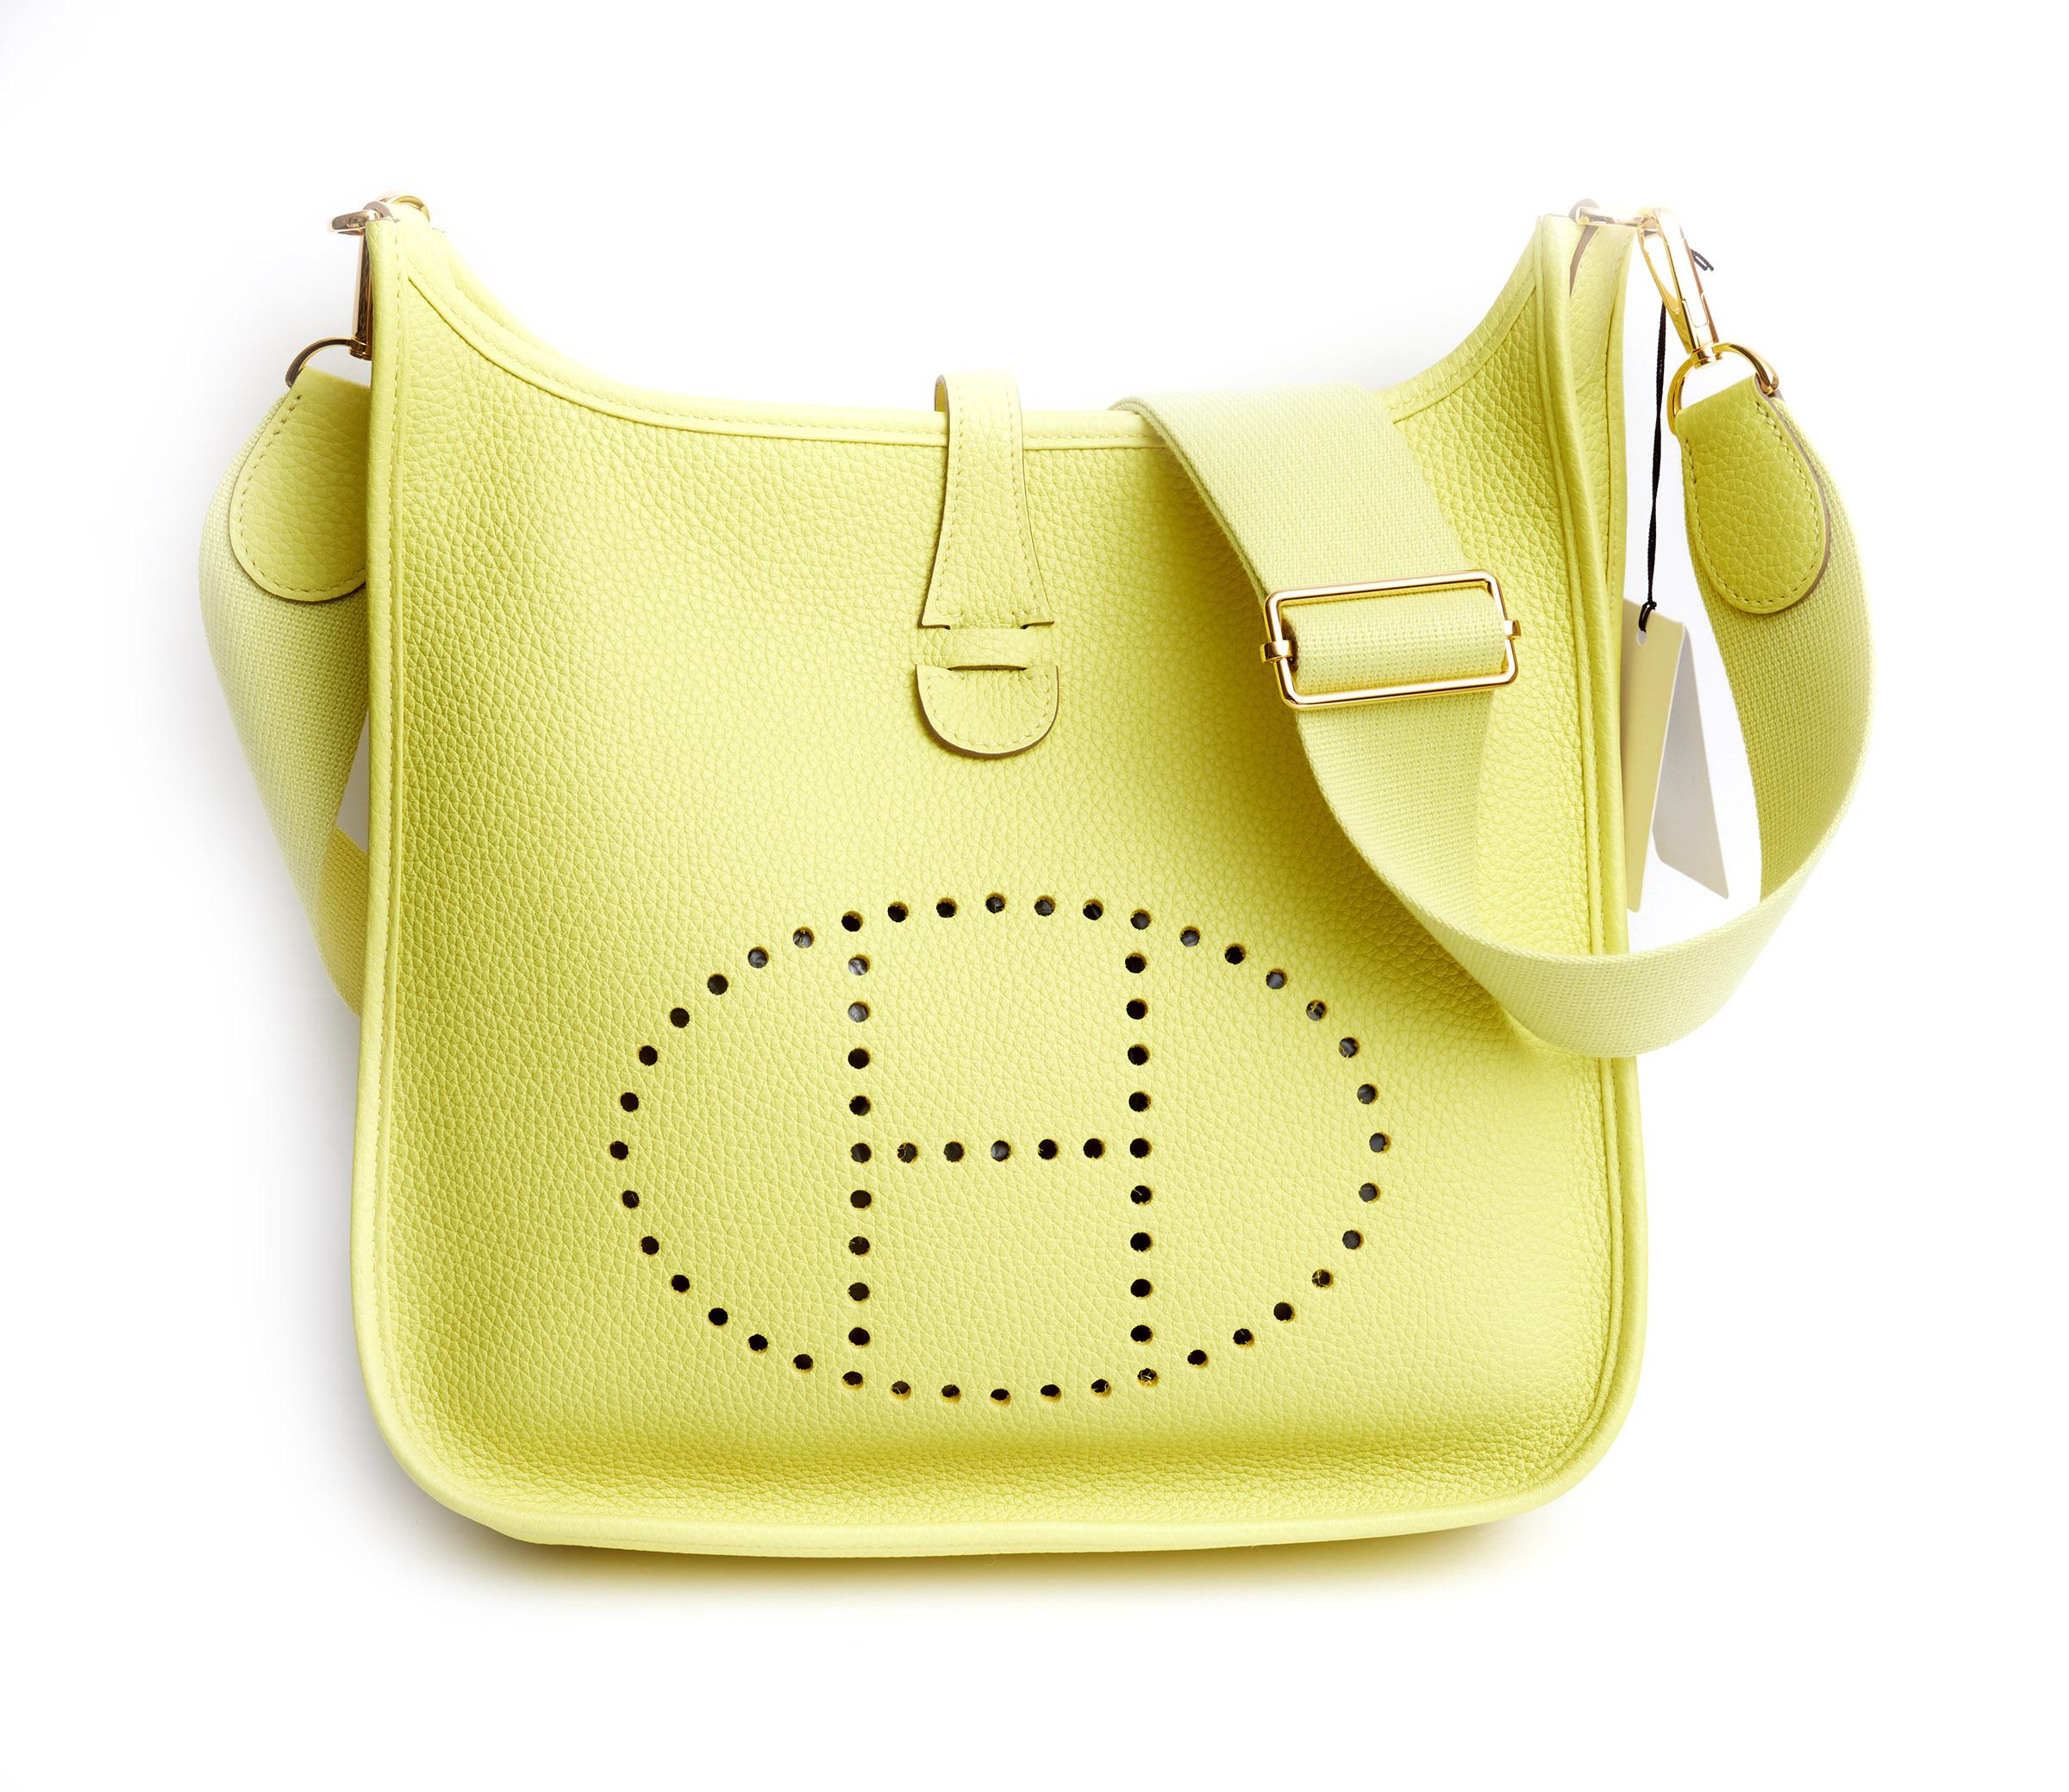 Hermès lime yellow Clemence leather medium (PM) Evelyne with gold tone hardware. Adjustable shoulder strap, can be worn cross body. Date stamp Y in a square, 2020. Comes with original duster, shoulder strap, box, and ribbon.
